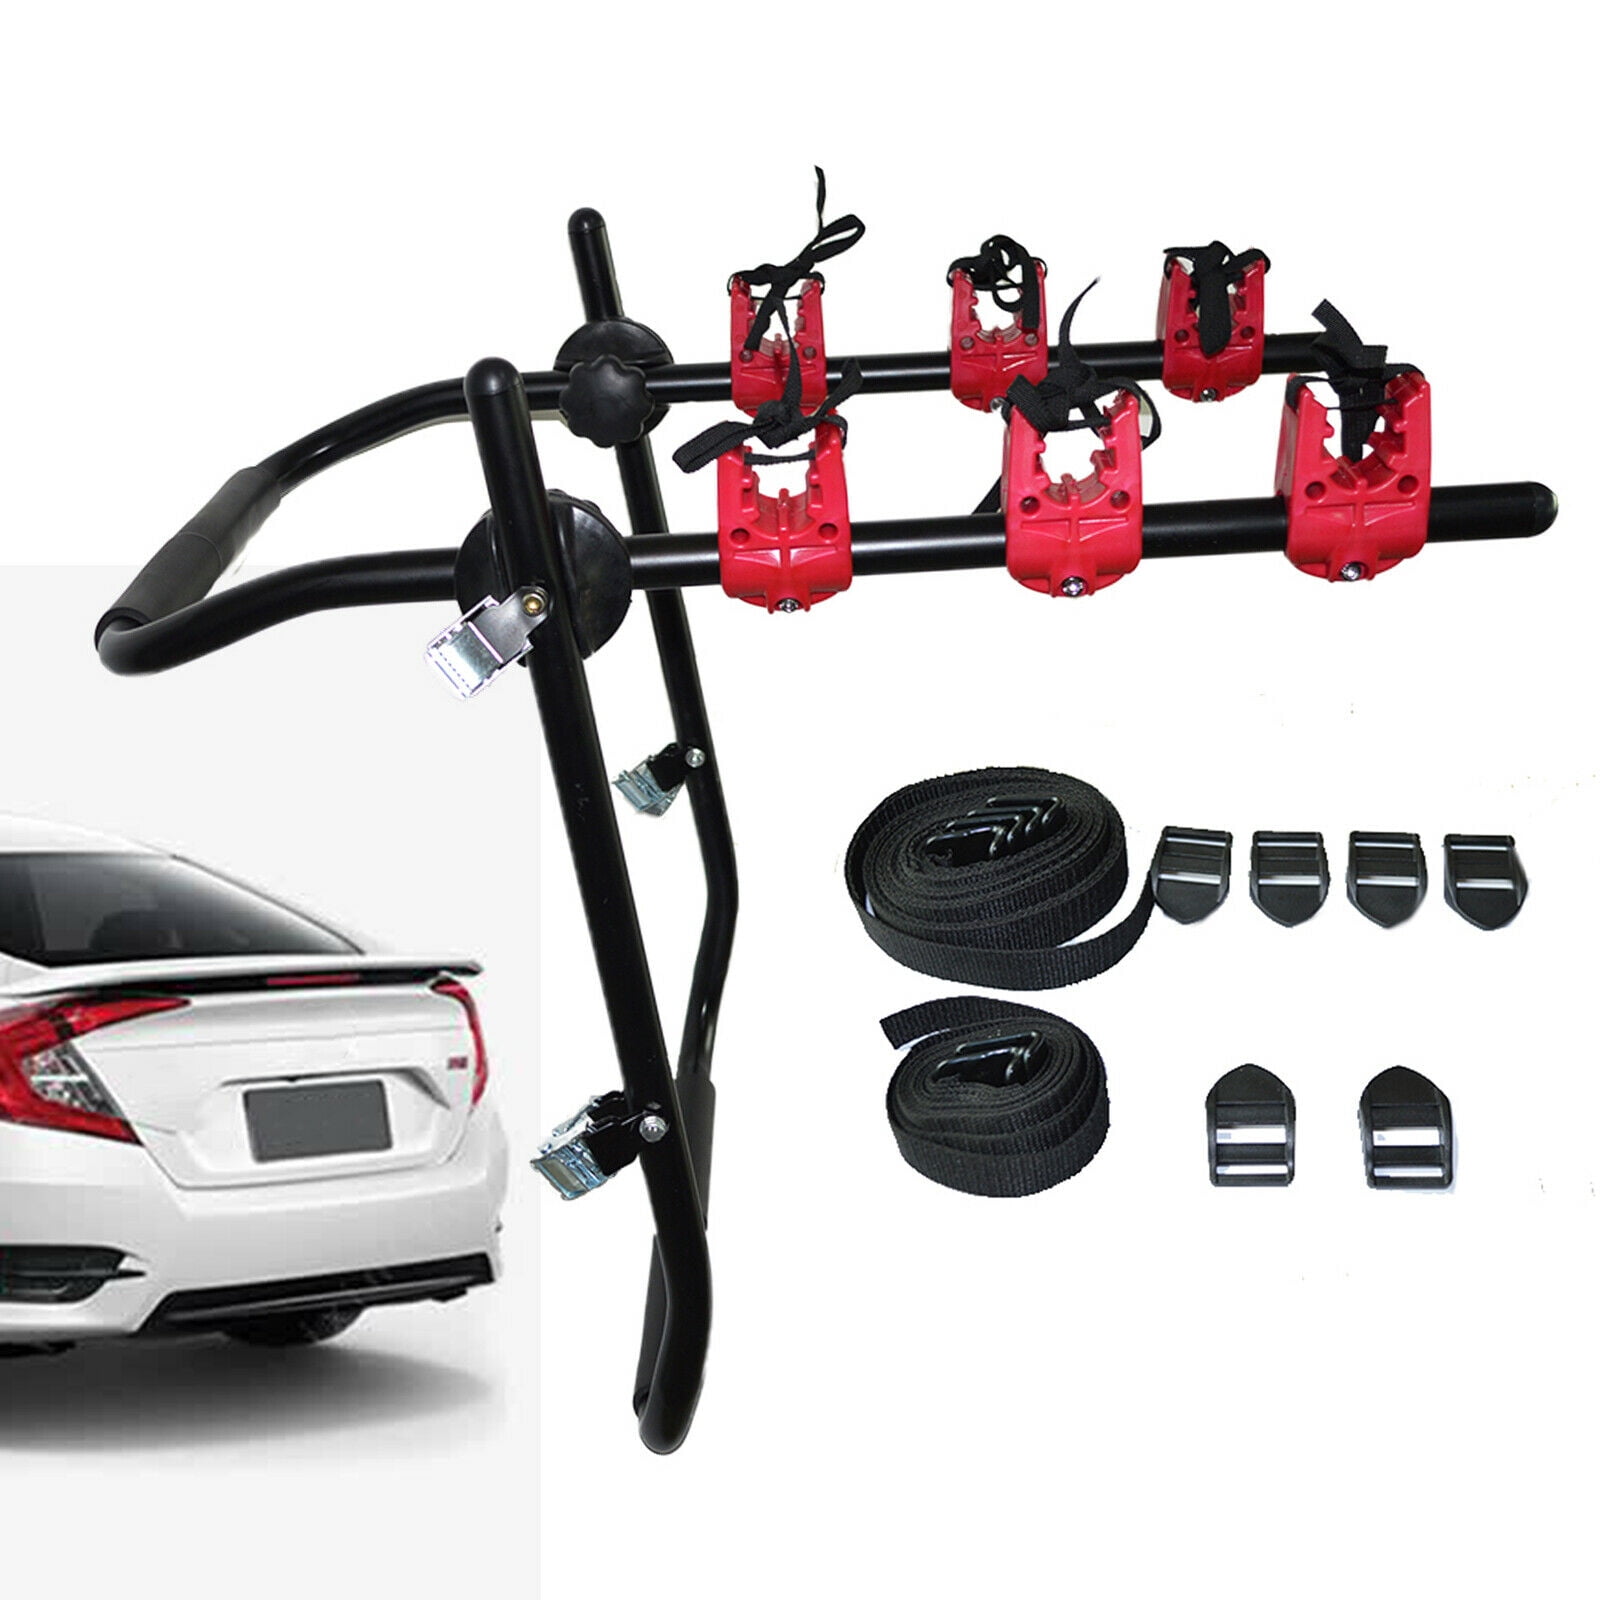 3 BIKE BICYCLE TRUNK MOUNT RACK BICYCLE CARRIER HATCHBACK FOR SUV CAR TRUCK RACK 